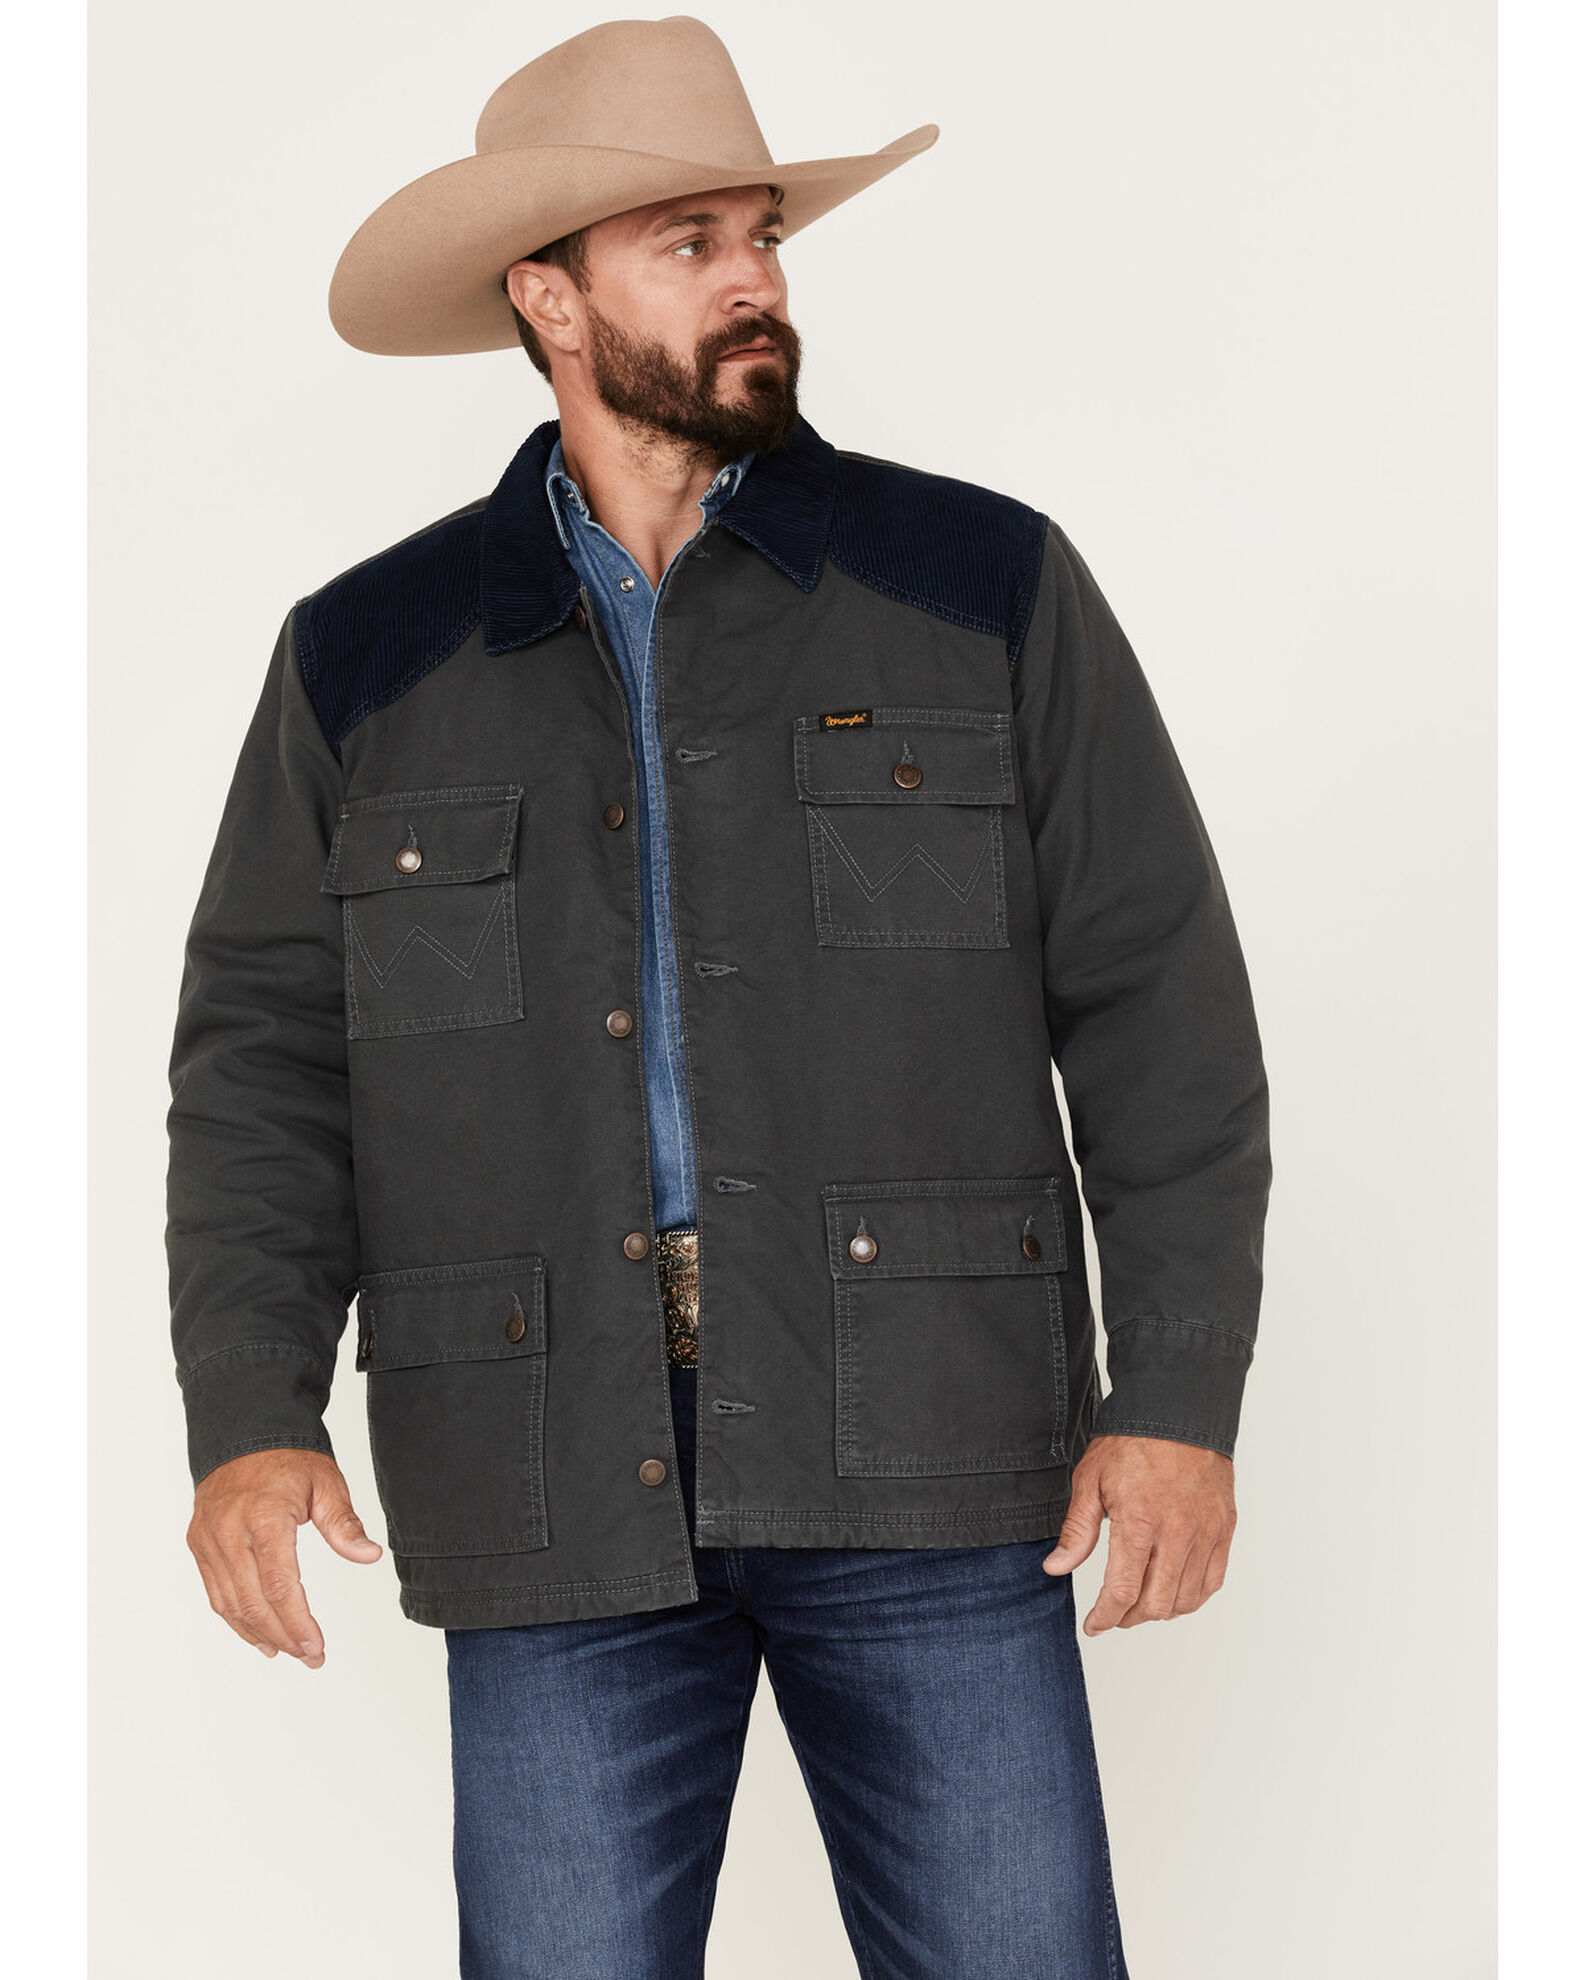 Wrangler Men's Quilted Lined Barn Coat - Country Outfitter